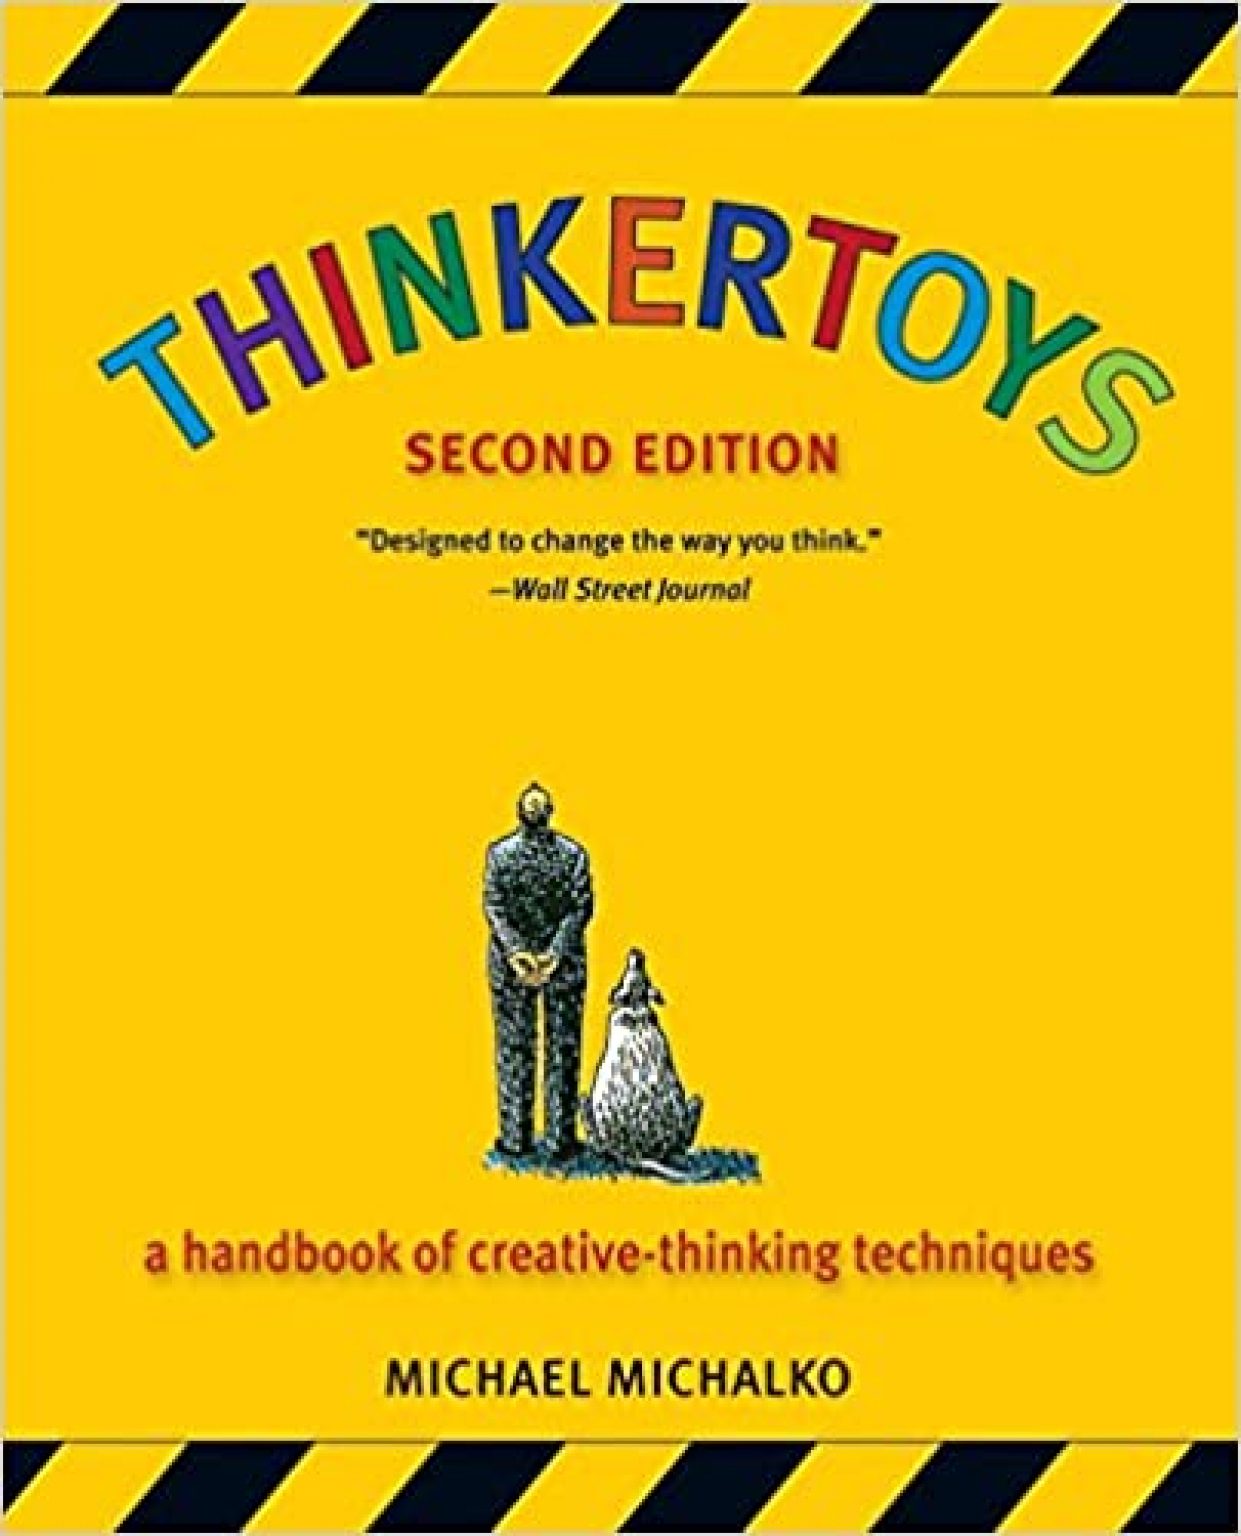 thinking better book review